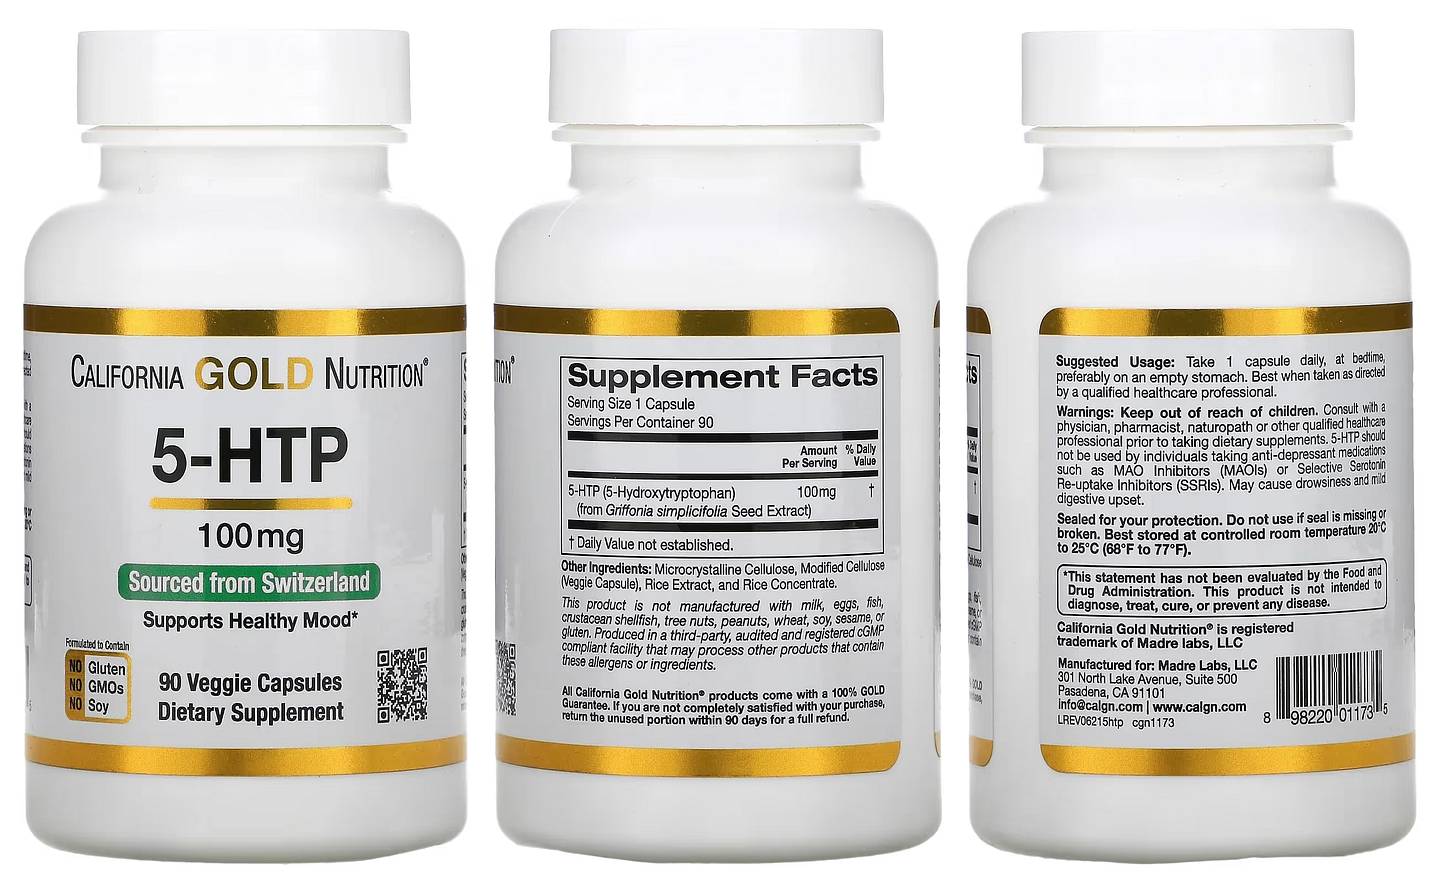 California Gold Nutrition, 5-HTP packaging